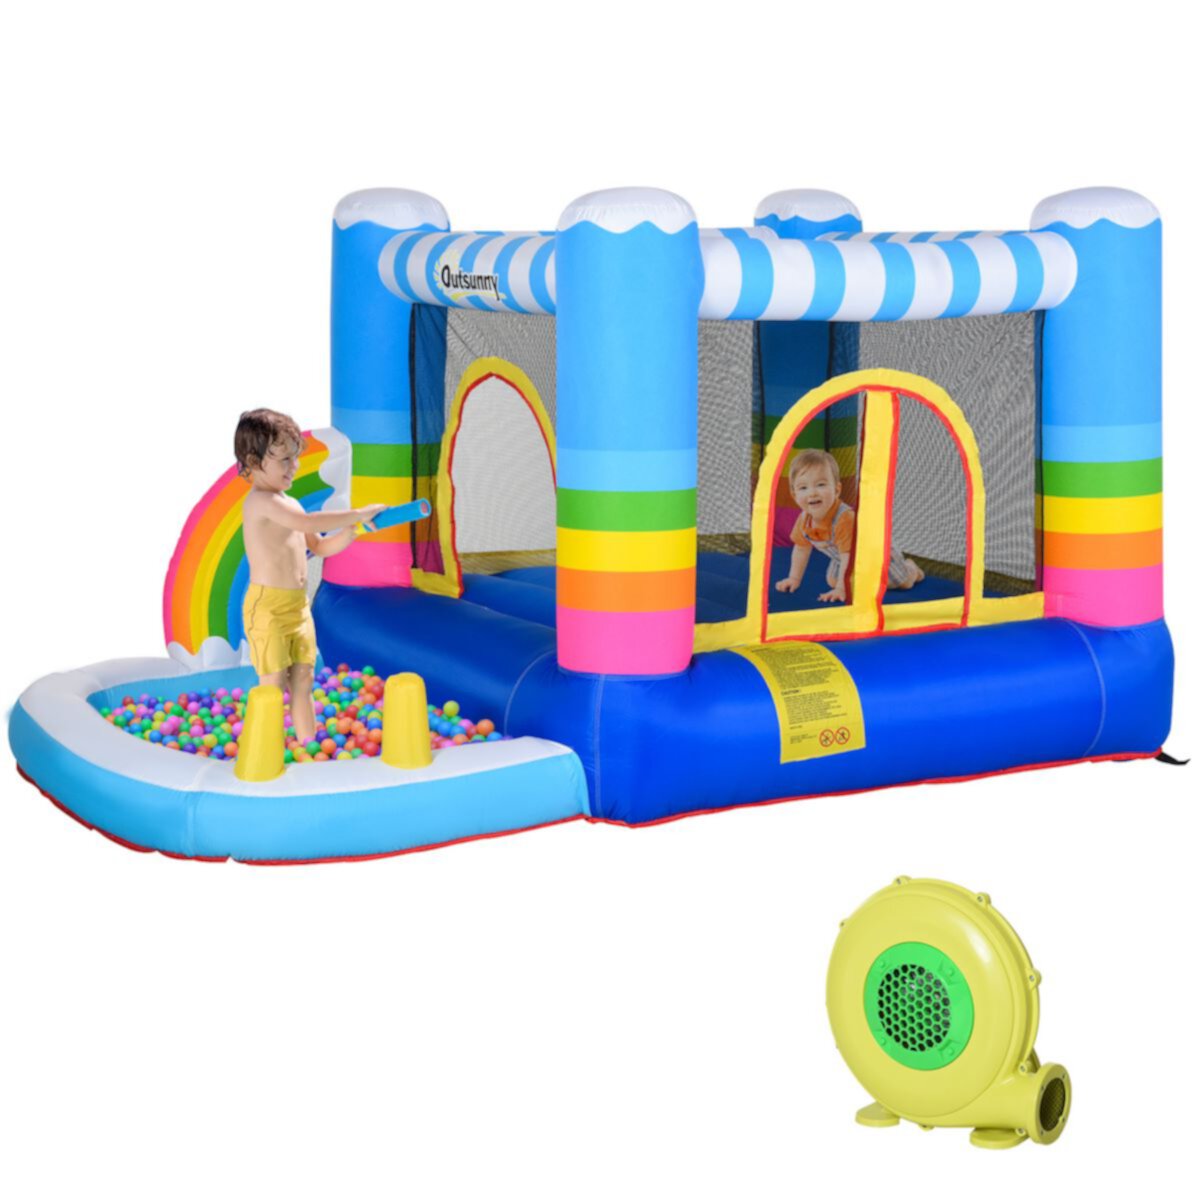 Outsunny Kids Inflatable Bounce House 2 in 1 Jumping Castle with Trampoline and Pool with Carry Bag and Inflator Included Outsunny